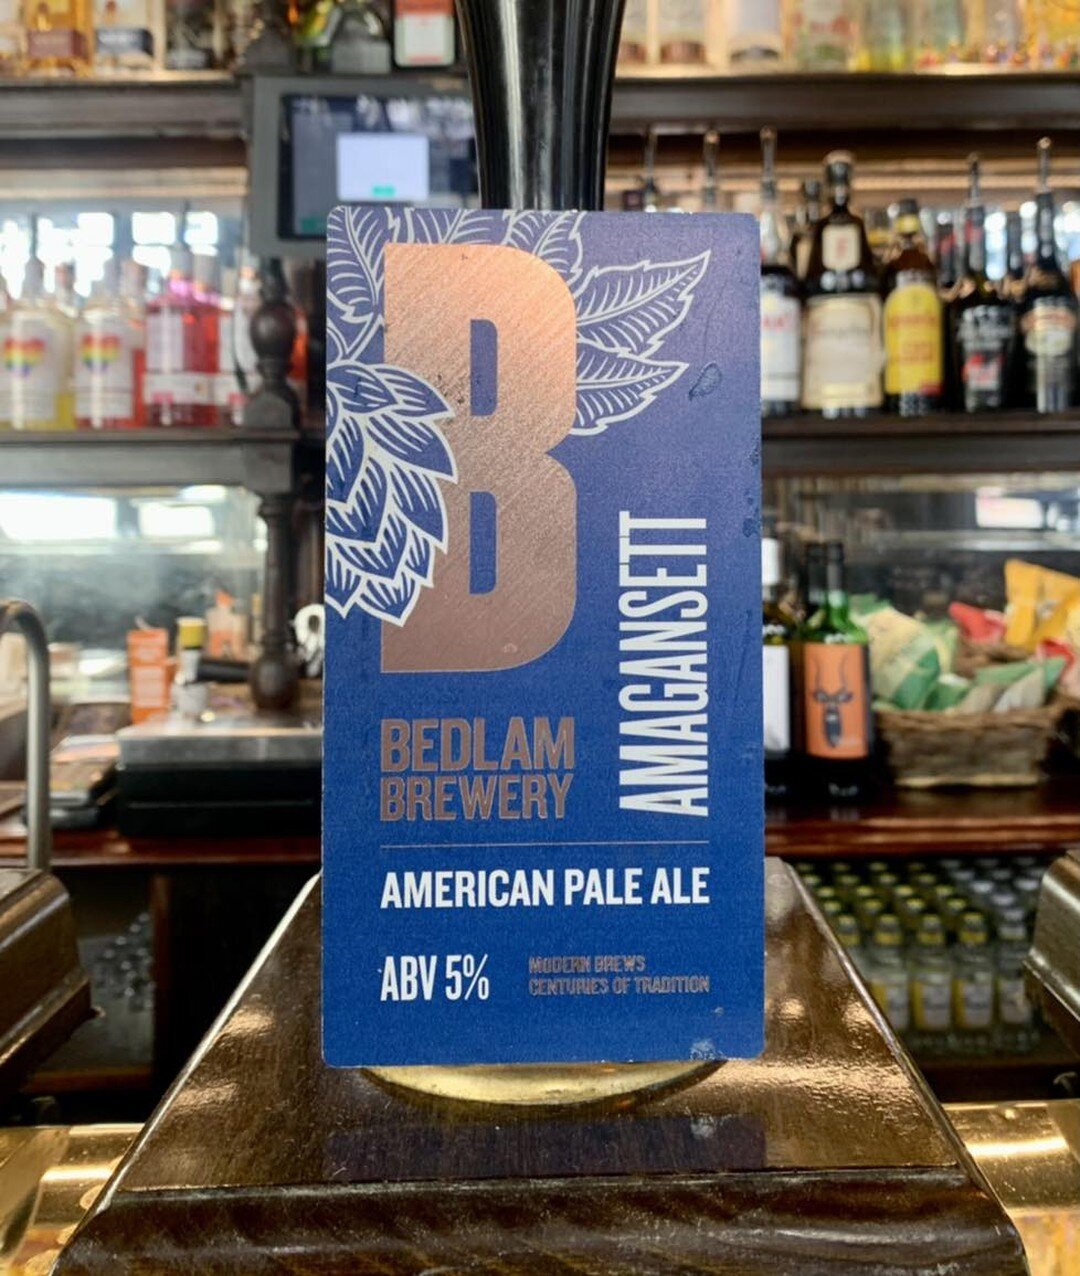 Our new Bedlam Brewery addition had proved to be very popular so far 🍺

Have you tried a pint yet?